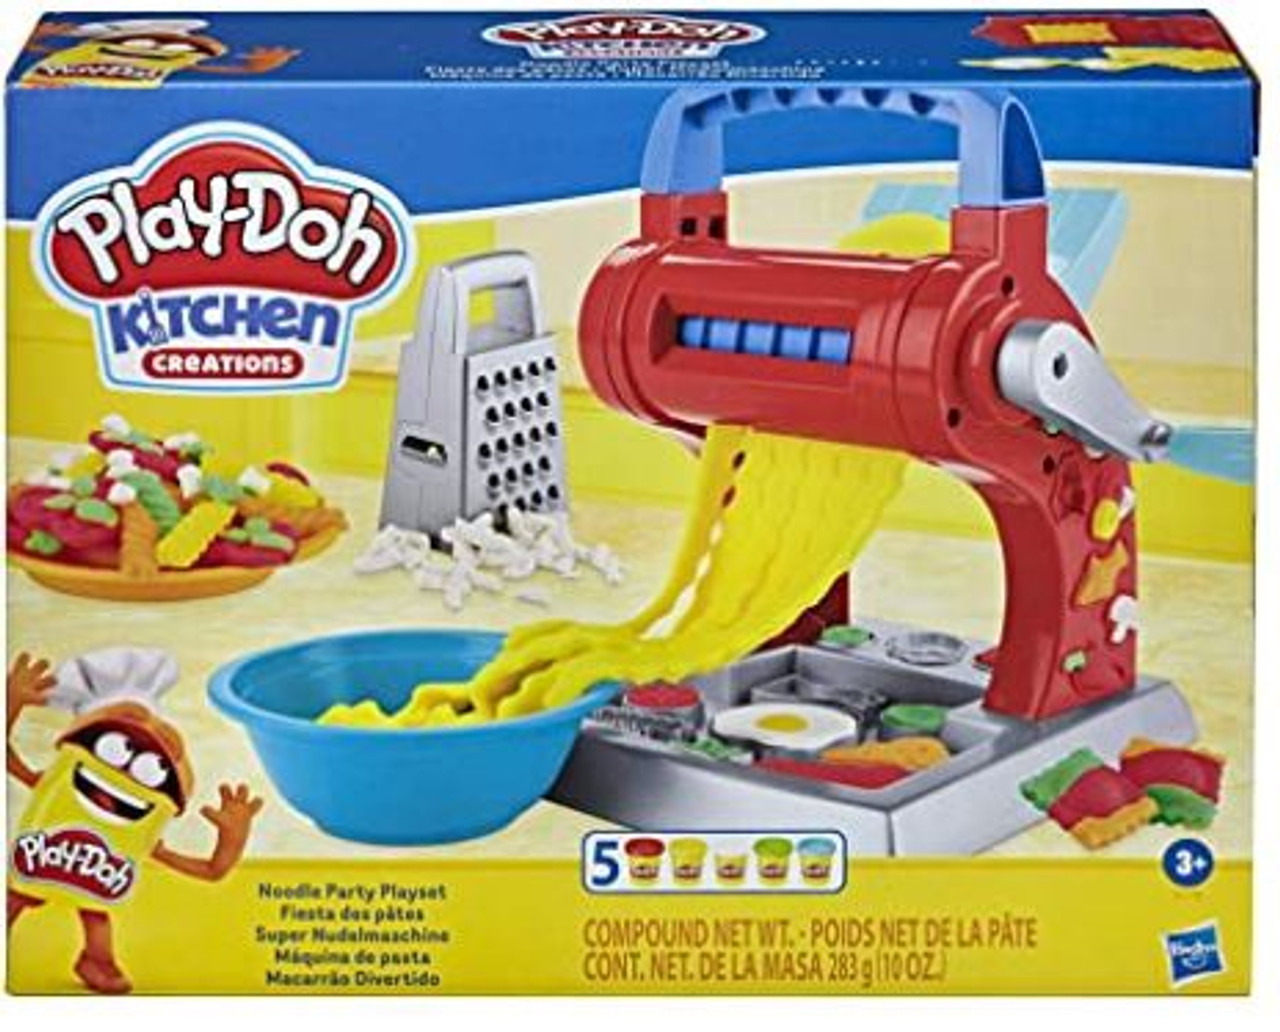  Play-Doh Kitchen Creations Ultimate Cookie Baking